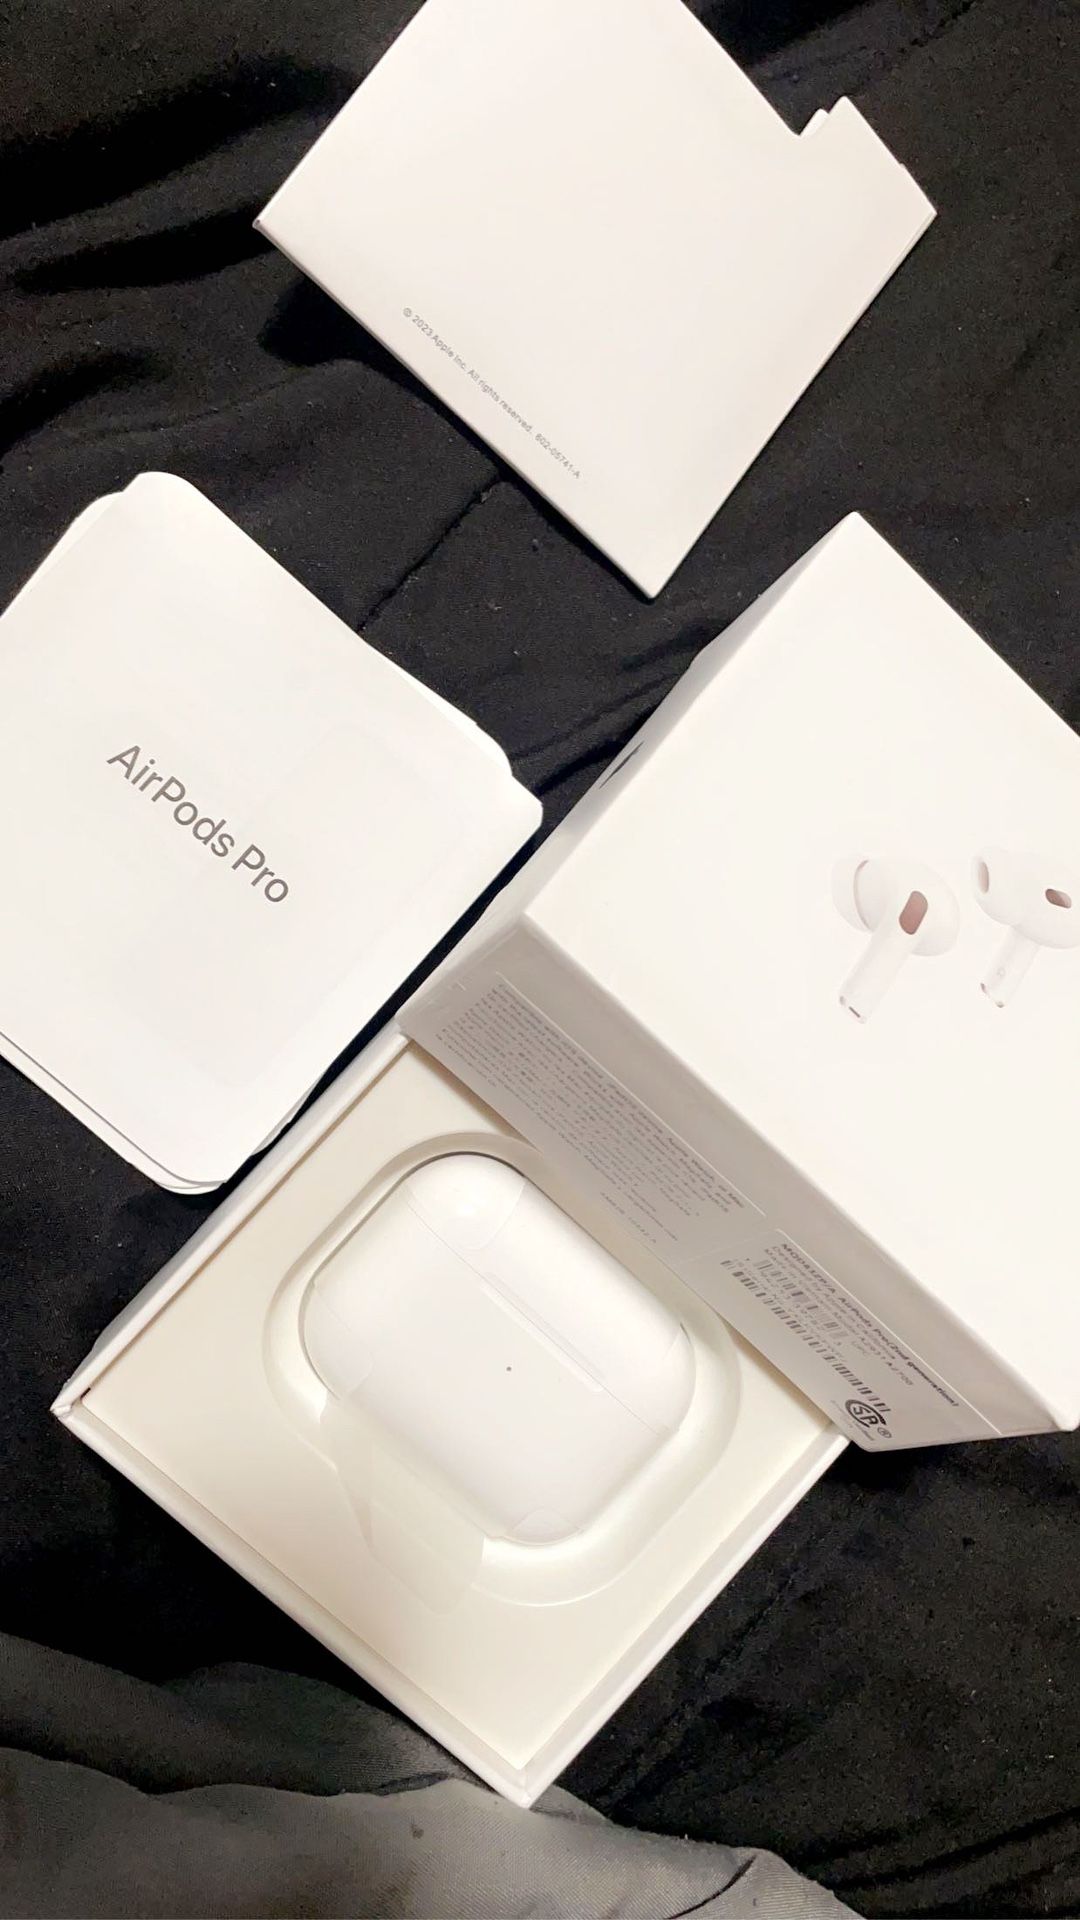 AirPods 2nd Gens New 